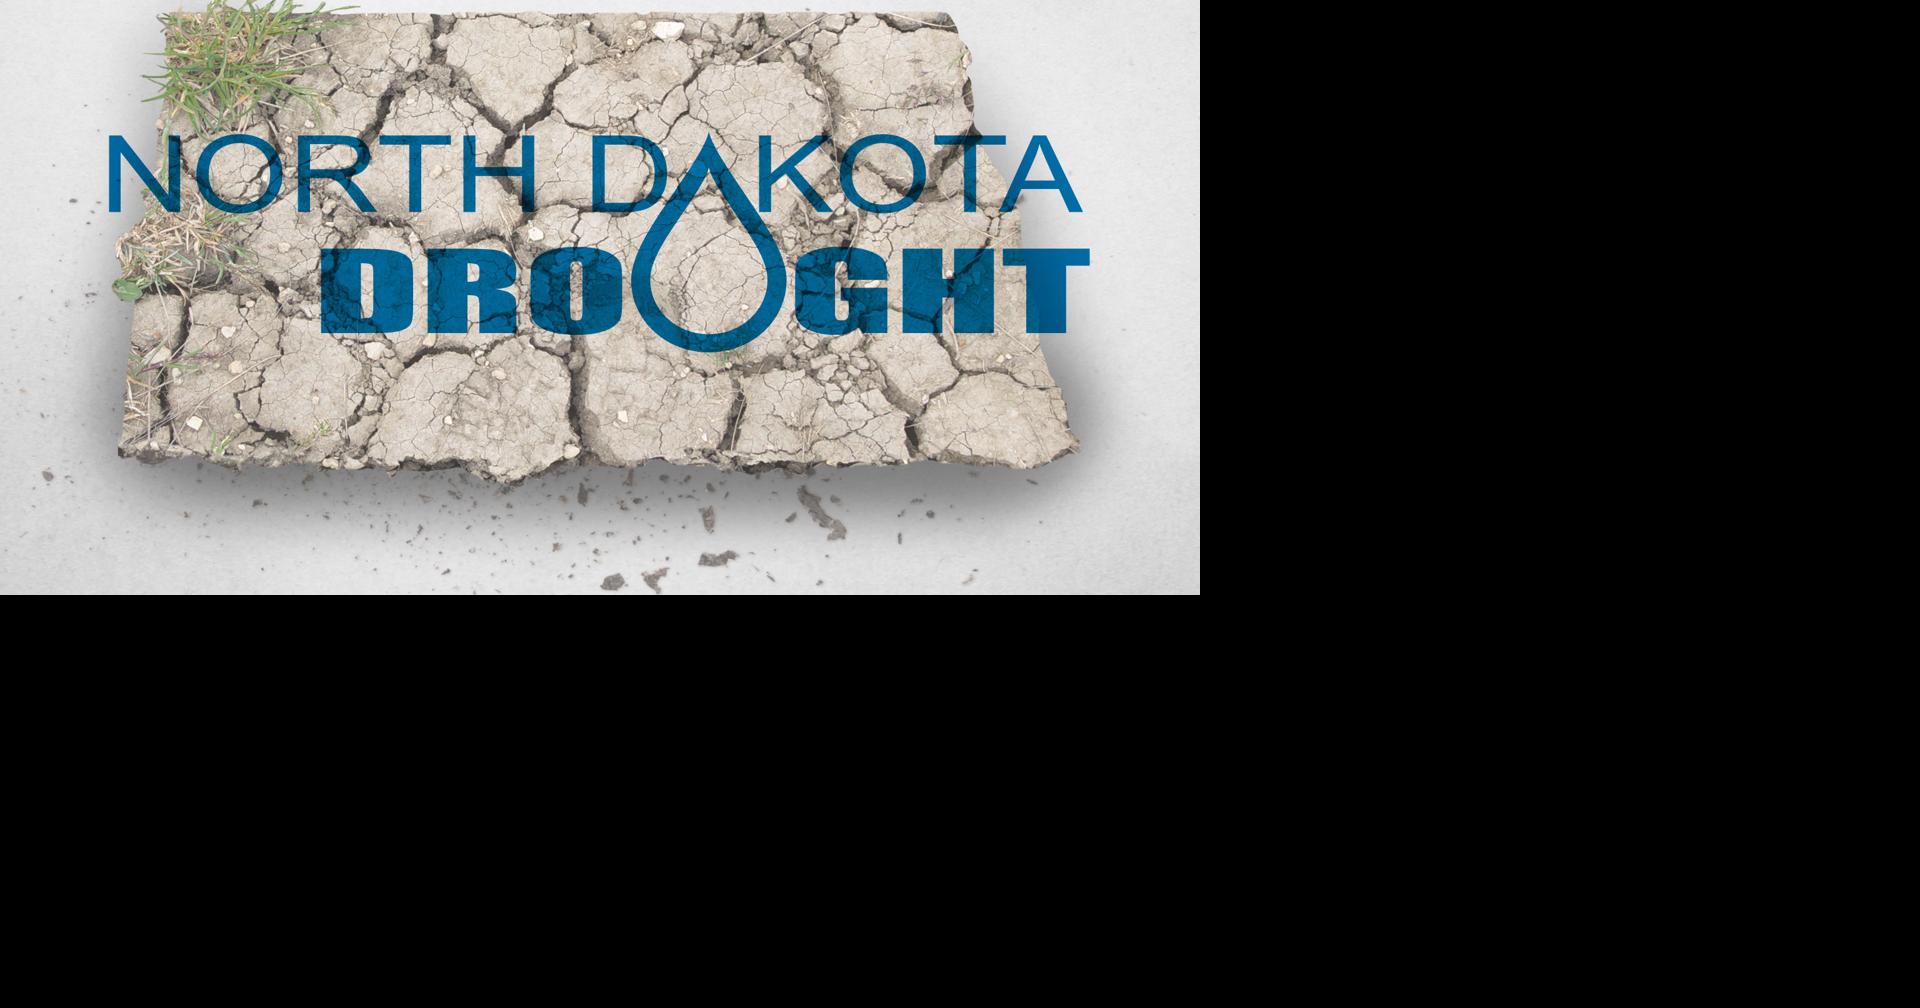 Drought still diminishing in North Dakota; wet holiday weekend expected